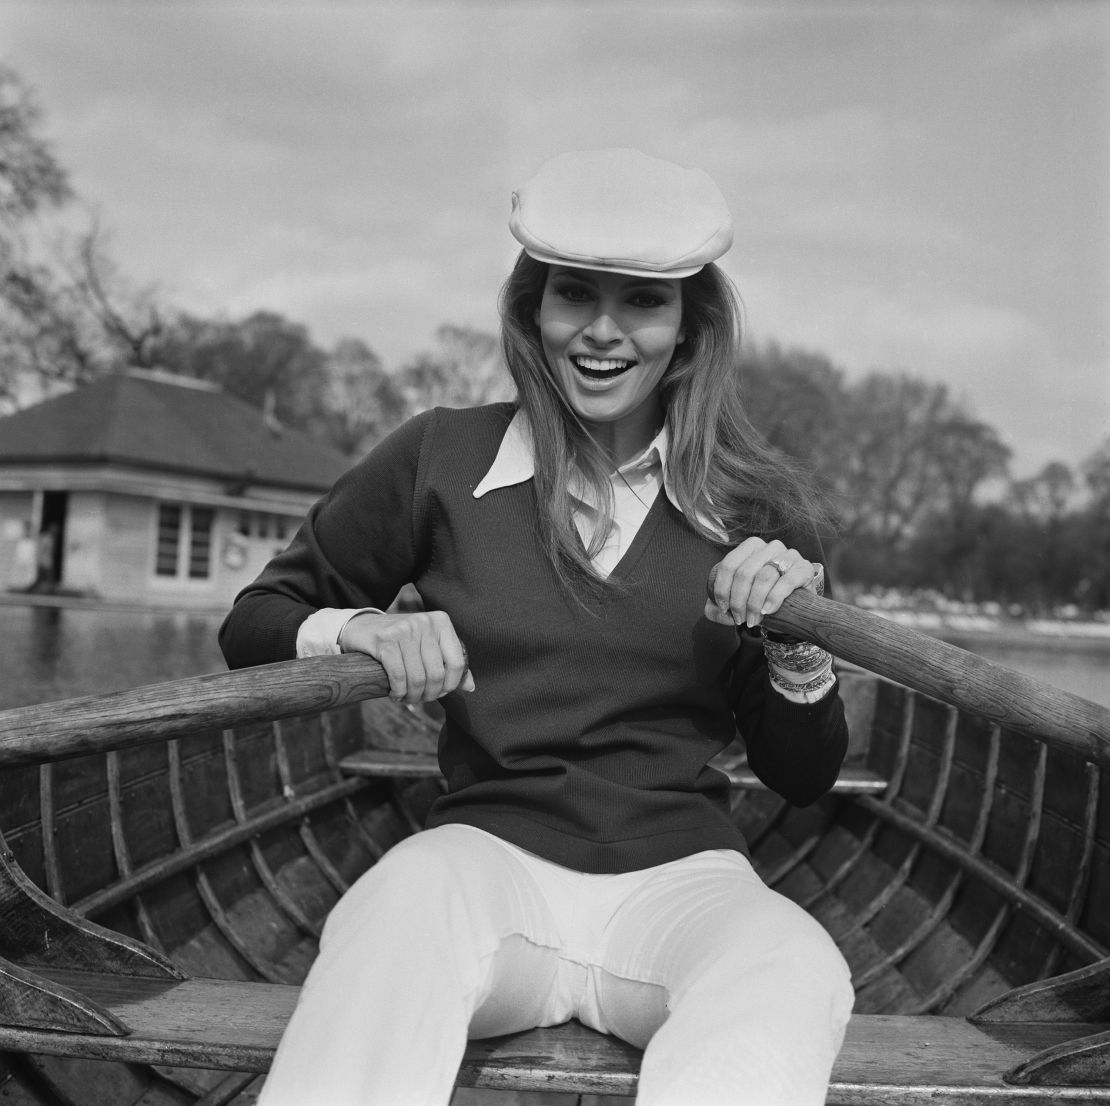 Raquel Welch rowing on the Serpentine, London, in April 1969.